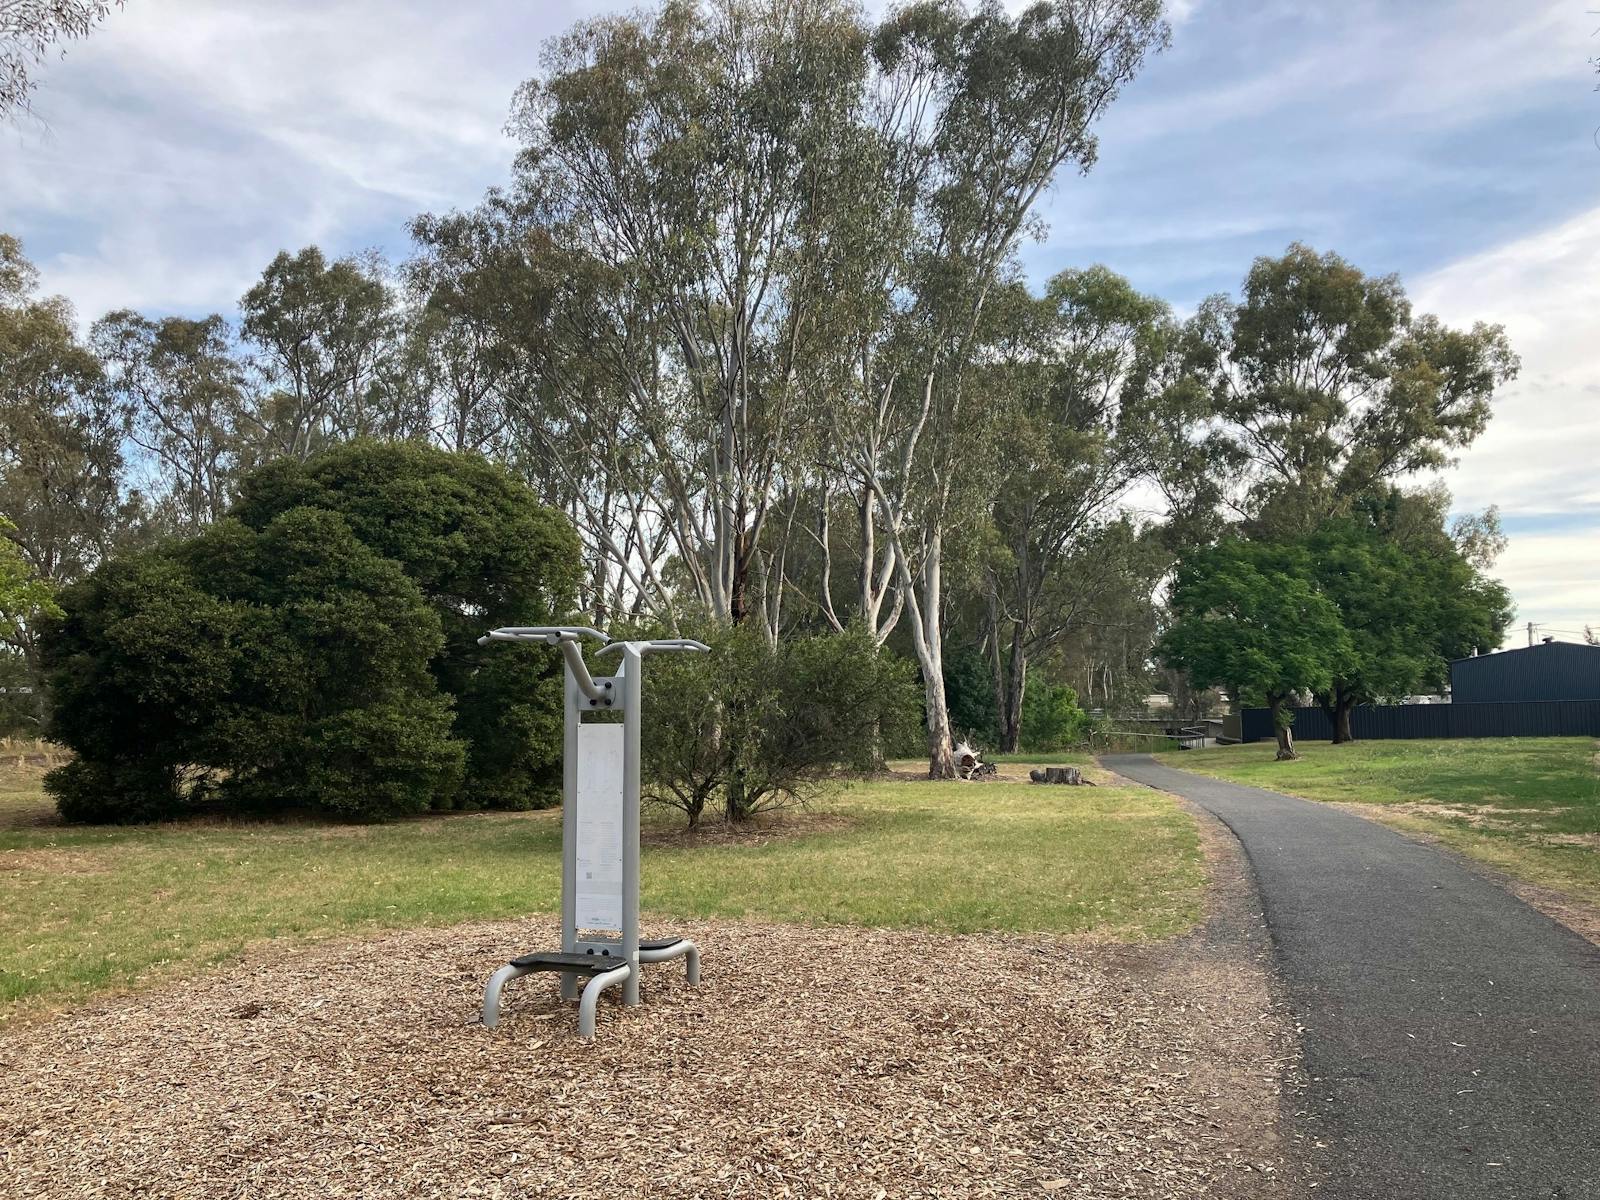 shared bike & walking path, outdoor gym equipment, gum trees in background